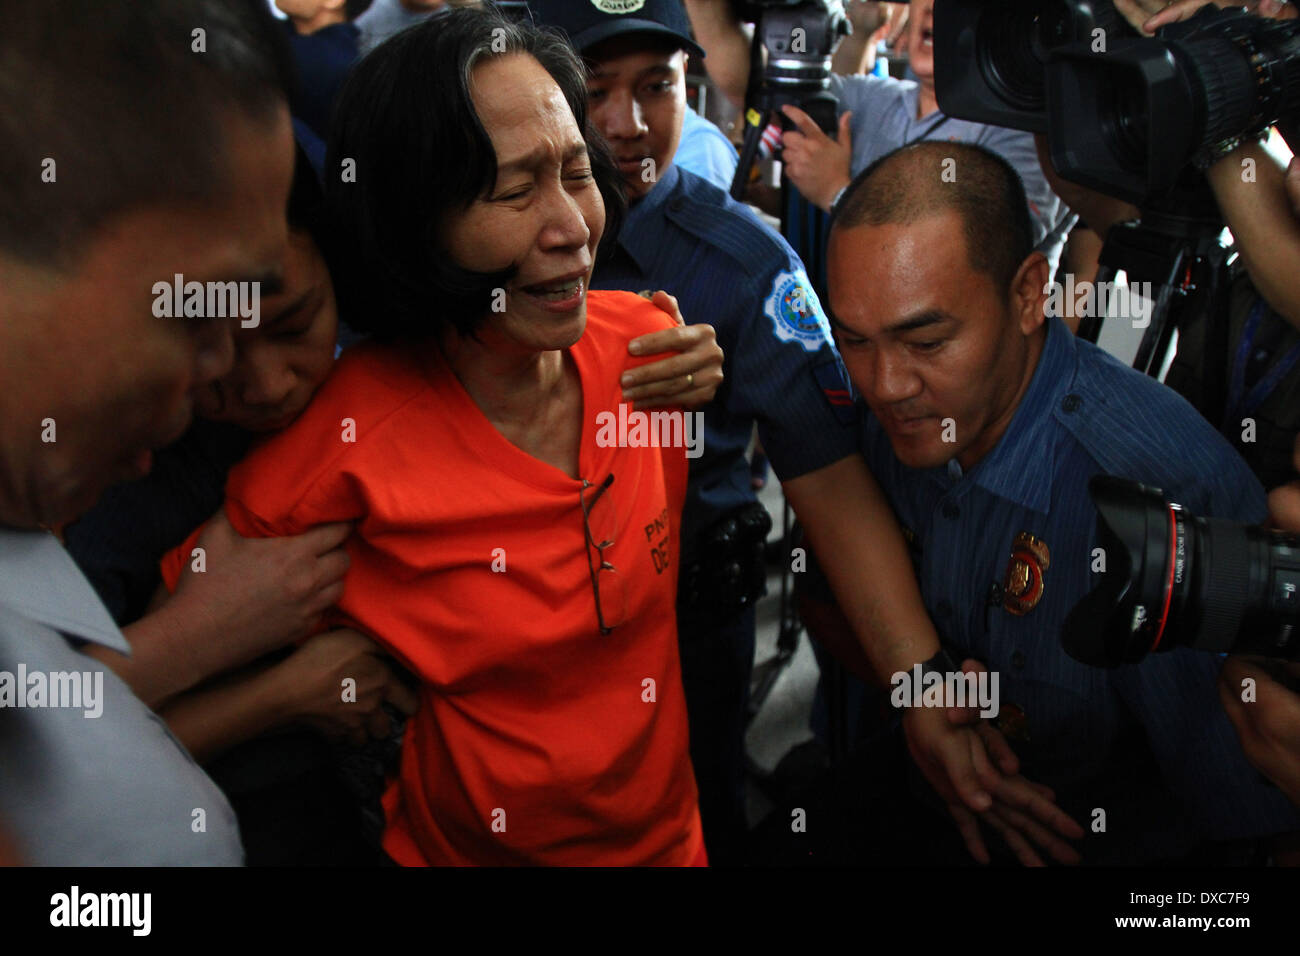 Quezon City, Philippines. 24th Mar, 2014. Wilma Tiamzon (C), secretary general of the Communist Party of the Philippines (CPP)-NPA, reacts as she is taken by policemen into a police van after inquest proceeding at Camp Crame in Quezon City, the Philippines, March 24, 2014. The Communist Party of the Philippines, New People's Army and National Democratic Front (CPP-NPA-NDF) vowed Monday to pursue armed struggle despite the arrest of their two top leaders. Credit:  Rouelle Umali/Xinhua/Alamy Live News Stock Photo